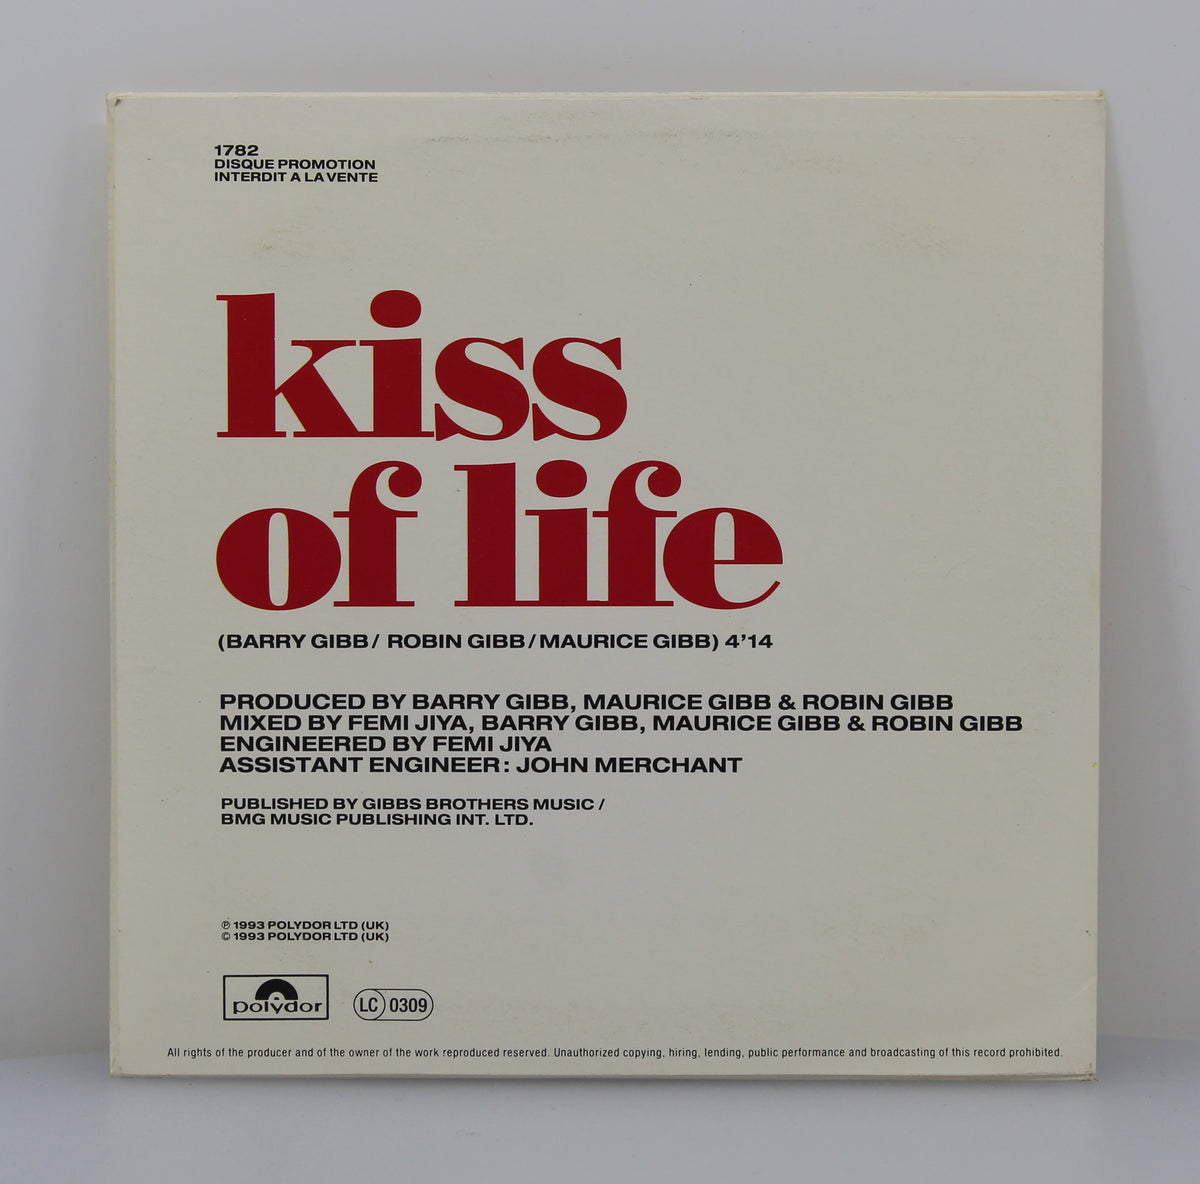 Bee Gees - Kiss Of Life, CD, Single, Promo, France 1993